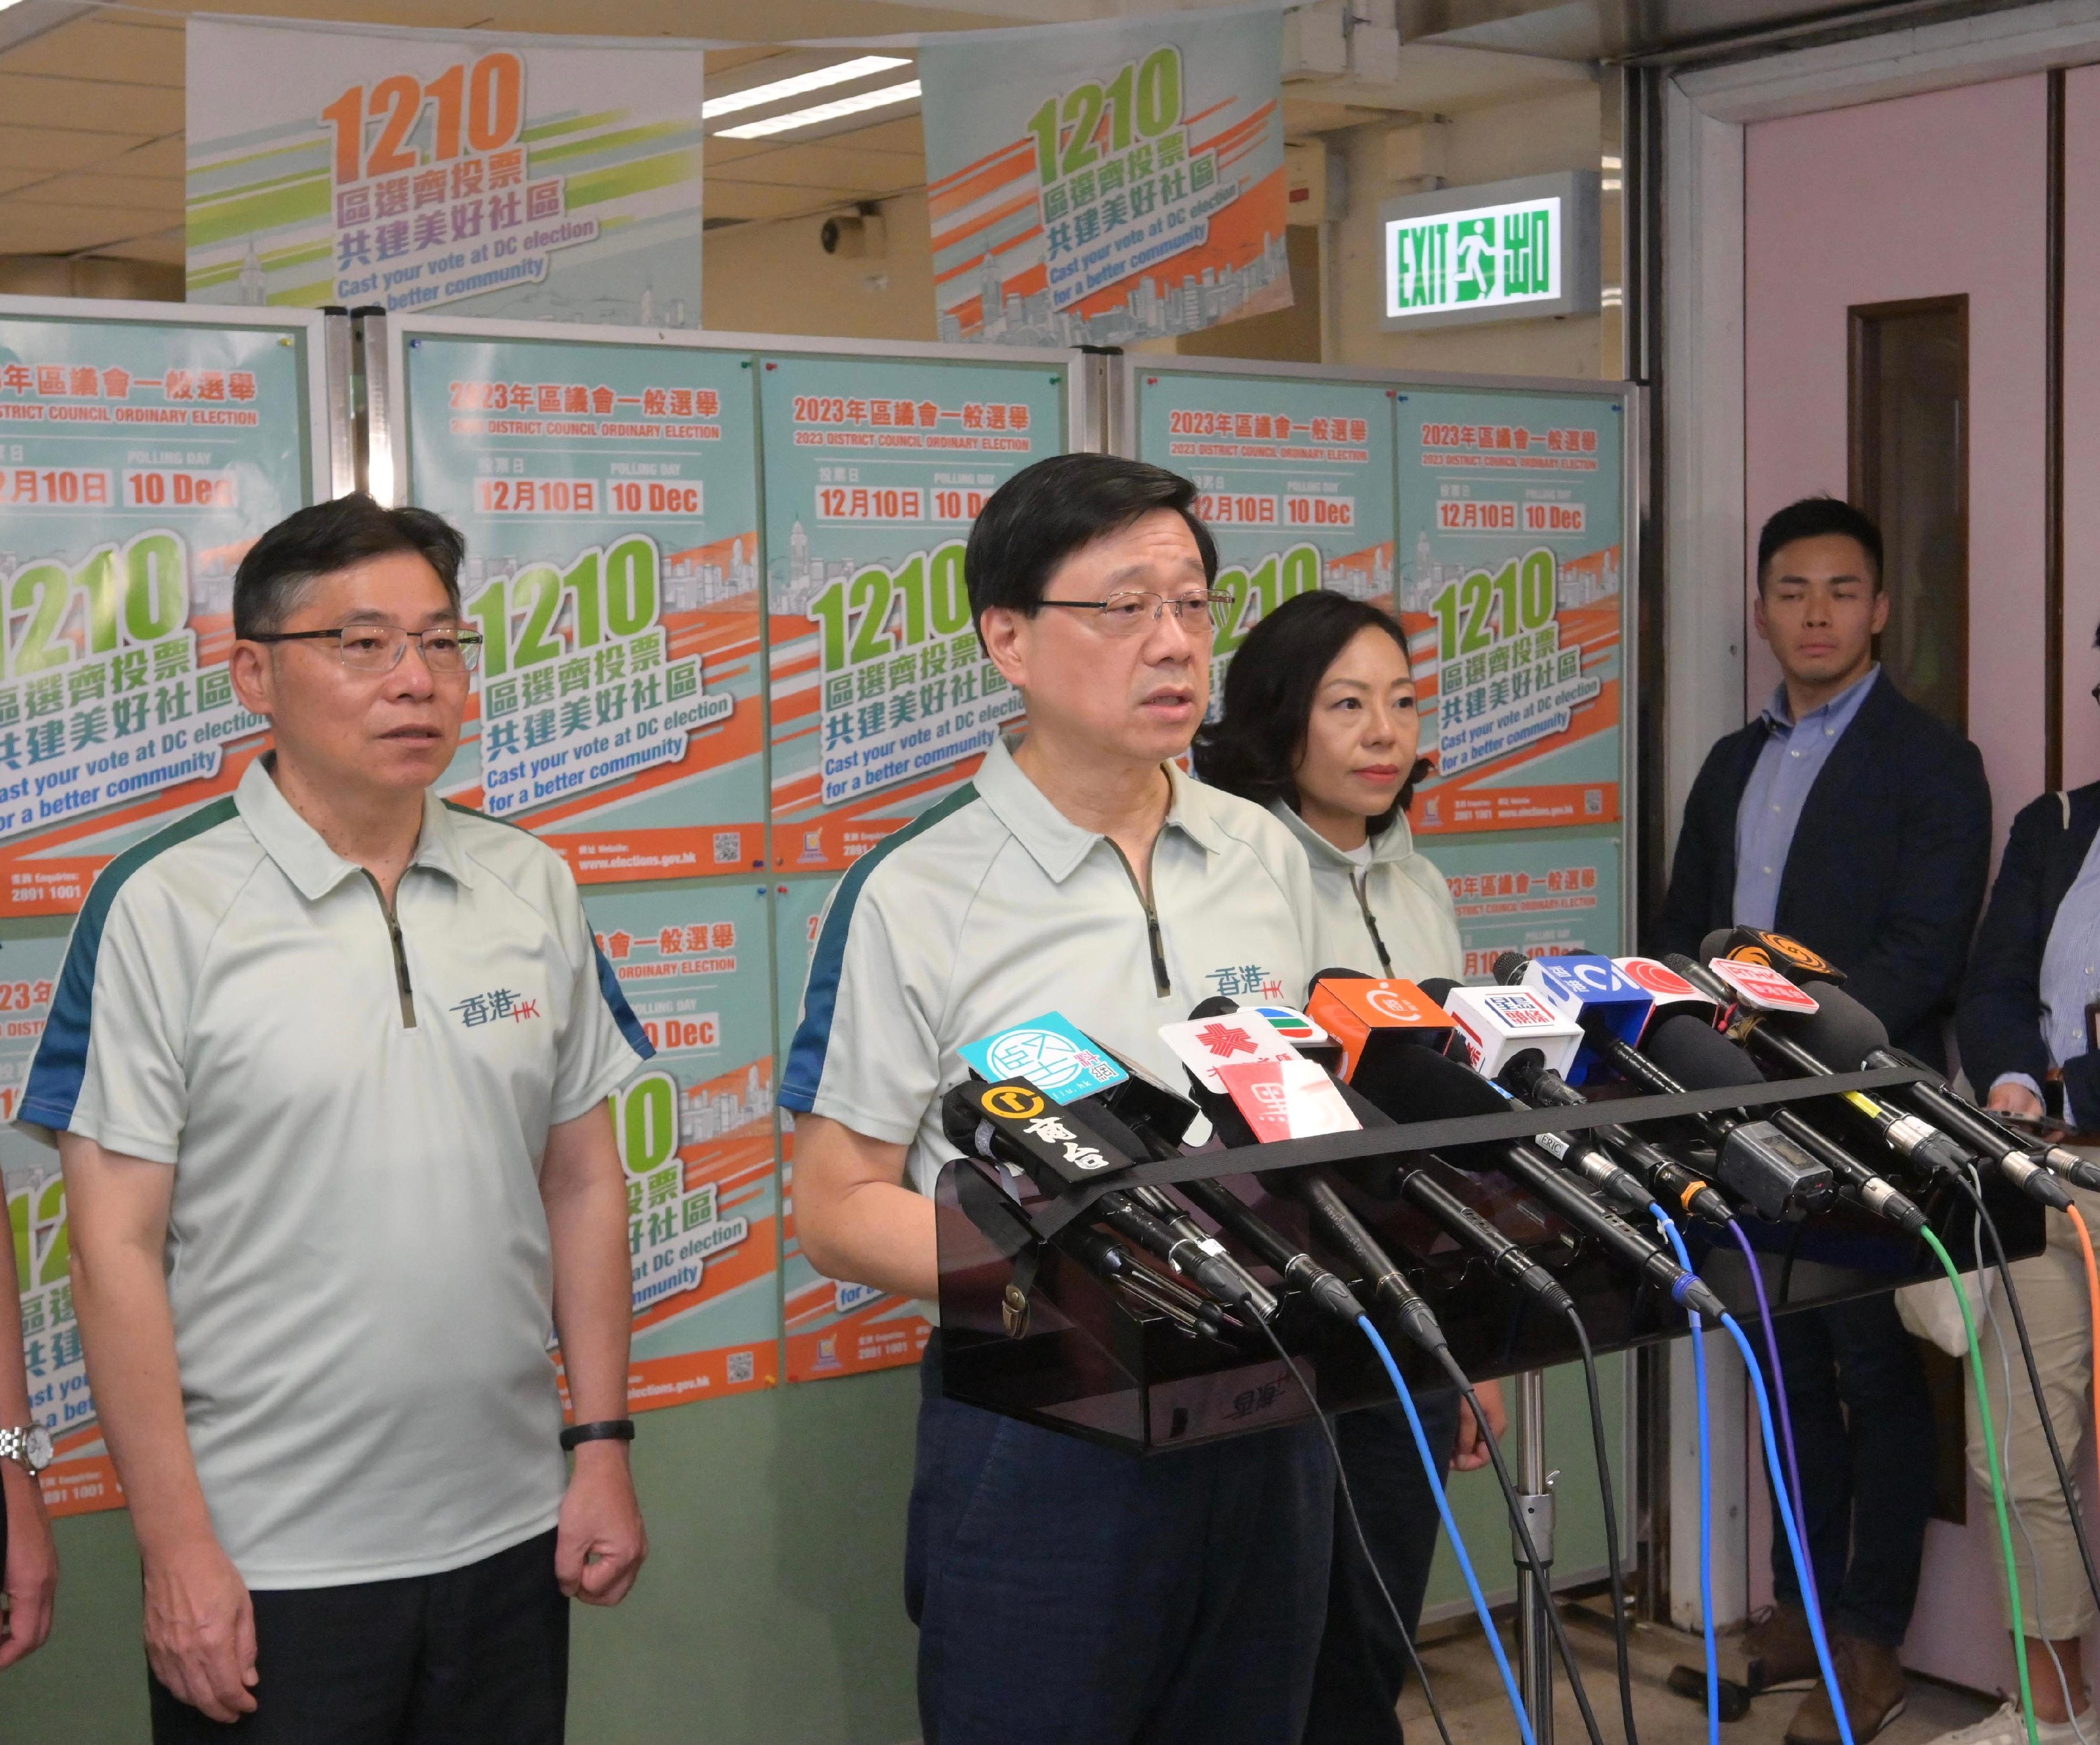 The Chief Executive, Mr John Lee (second left), accompanied by the Secretary for Transport and Logistics, Mr Lam Sai-hung (first left) and the Secretary for Home and Youth Affairs, Miss Alice Mak (second right), meets the media after visiting Wong Tai Sin and Kwun Tong today (November 15).